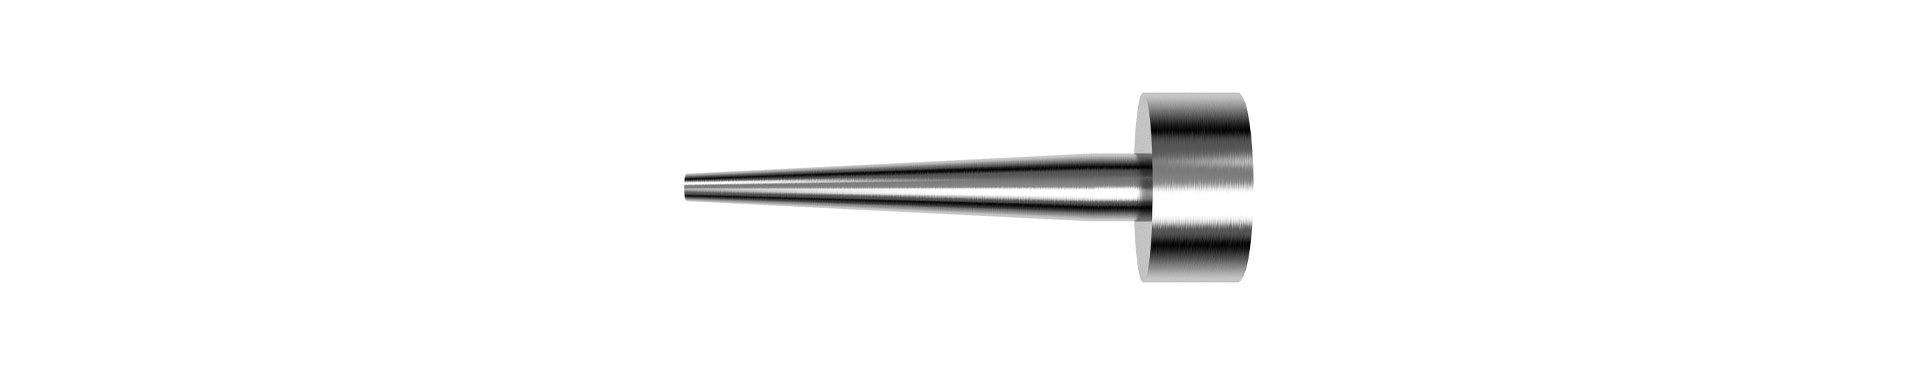 Catheter Tipping Dies and Forming Tools